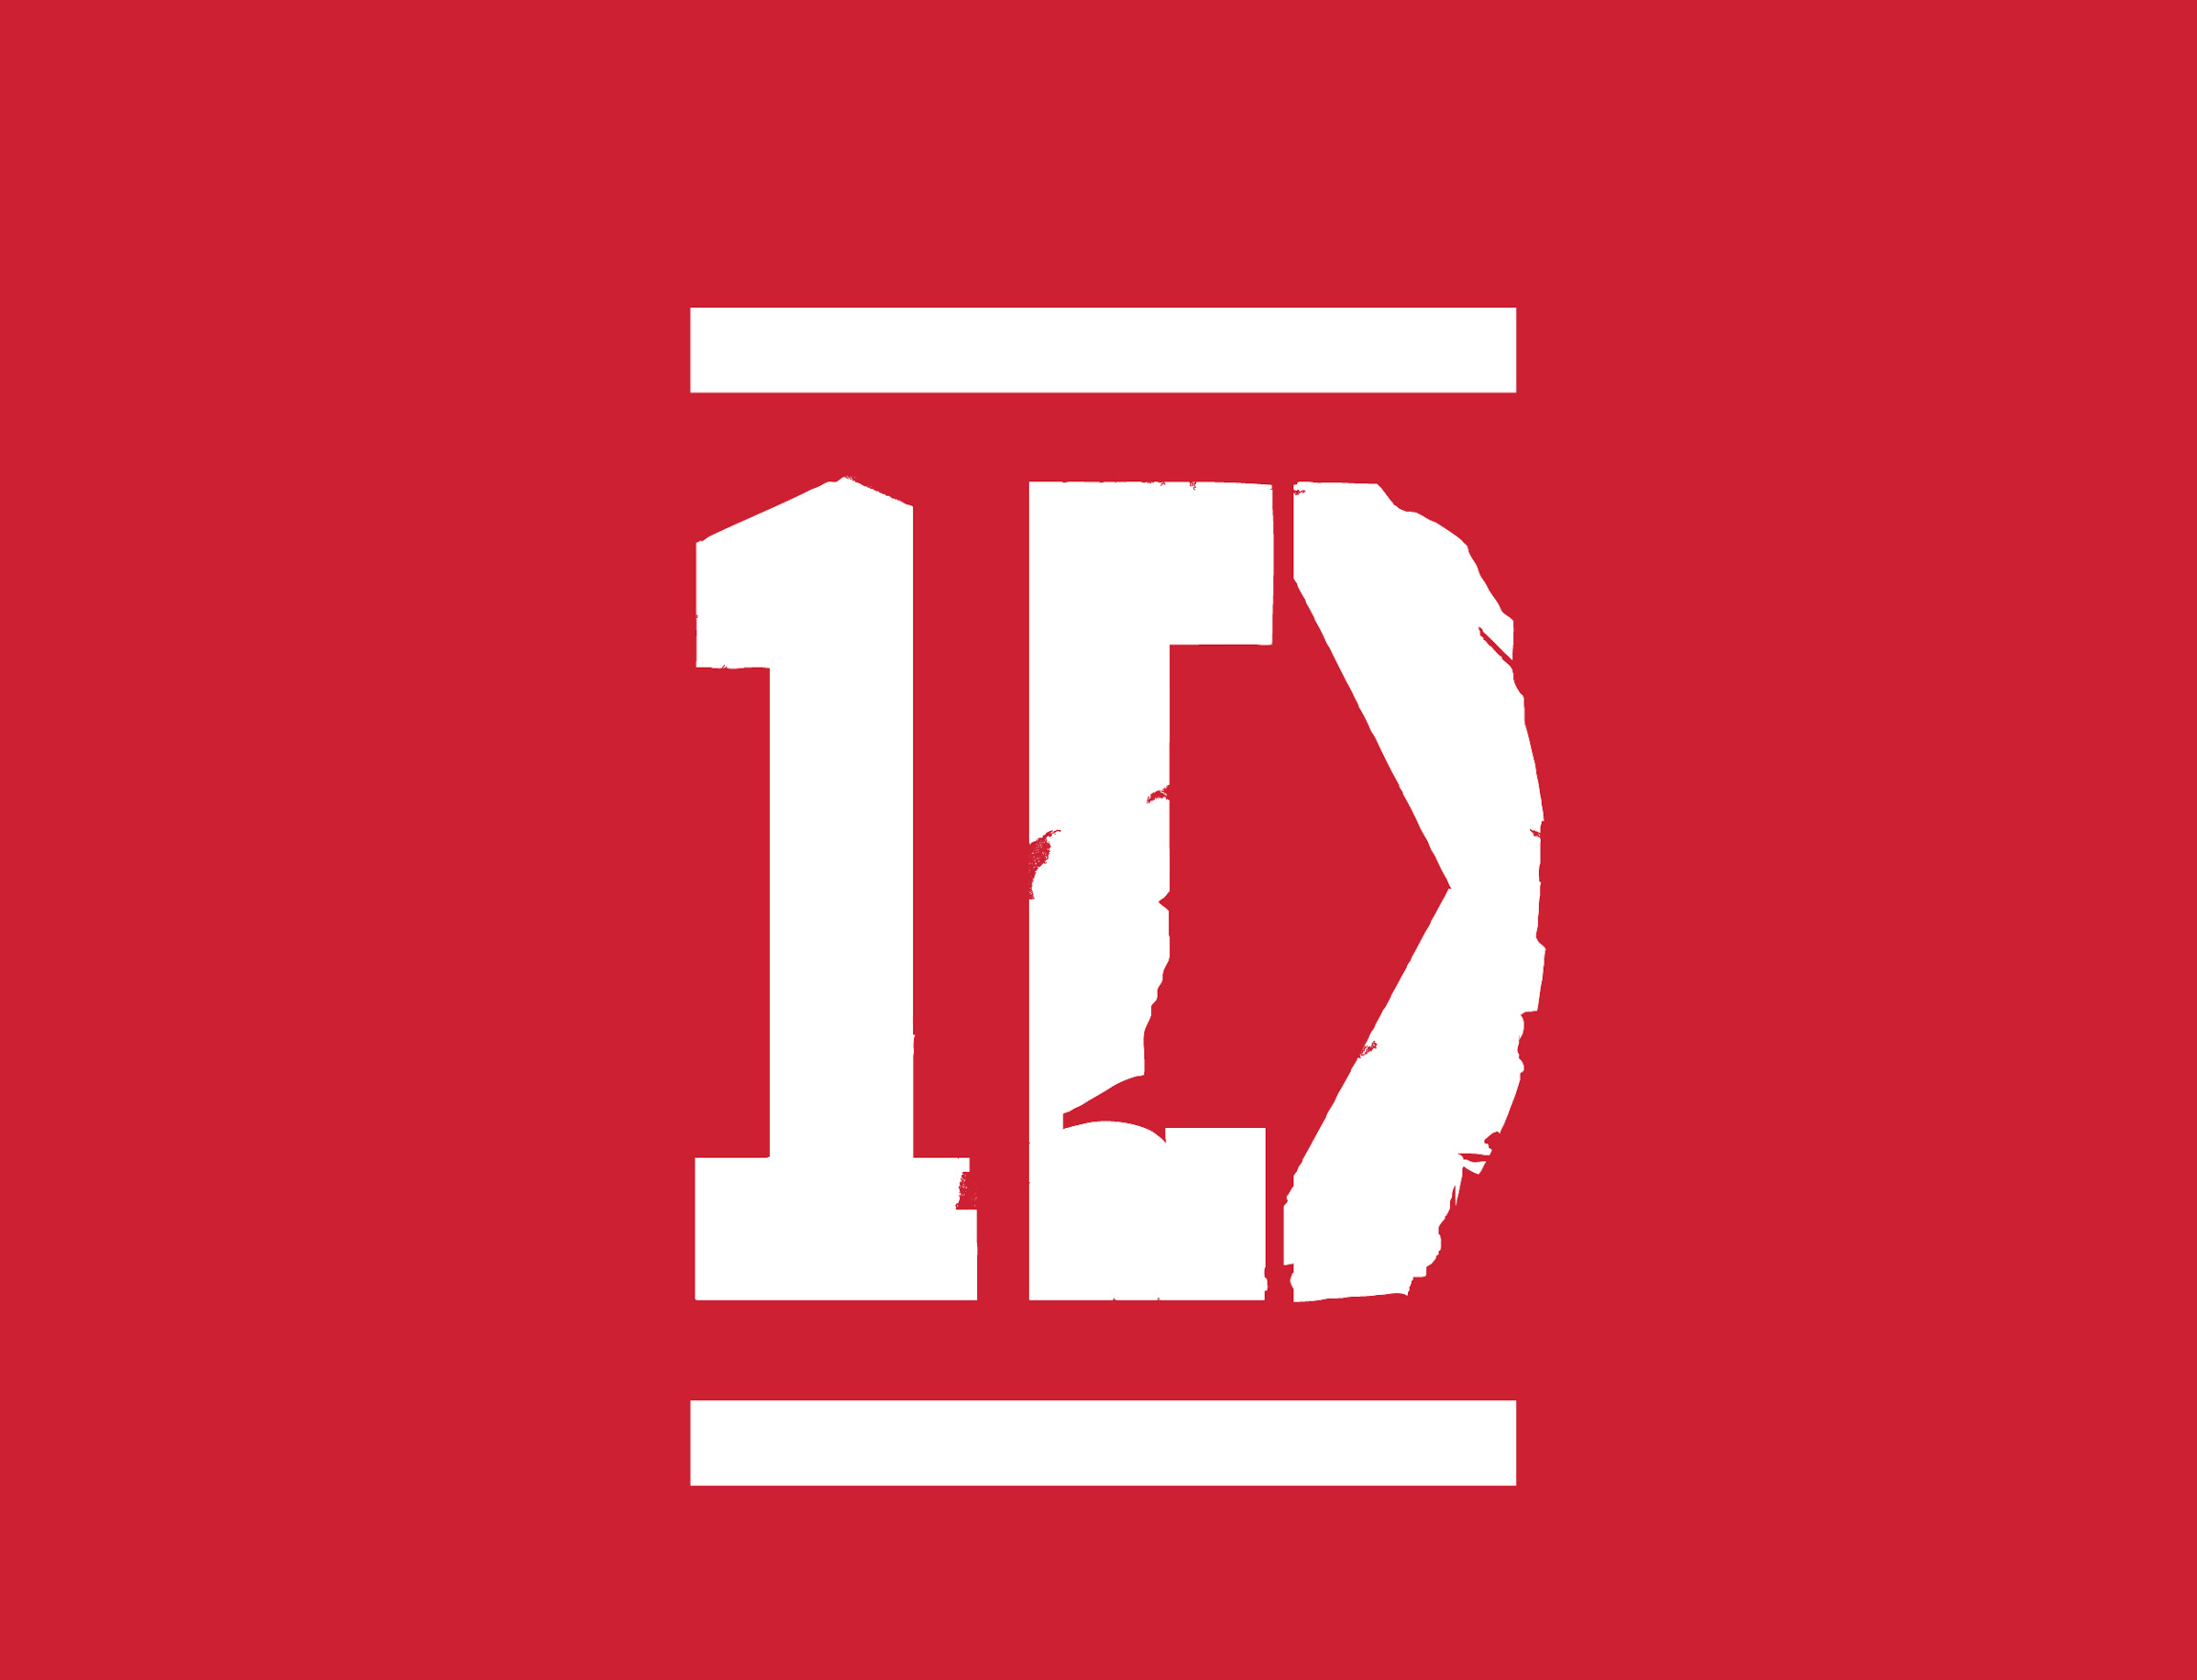 One Direction Logo, One Direction Symbol, Meaning, History and Evolution2300 x 1759